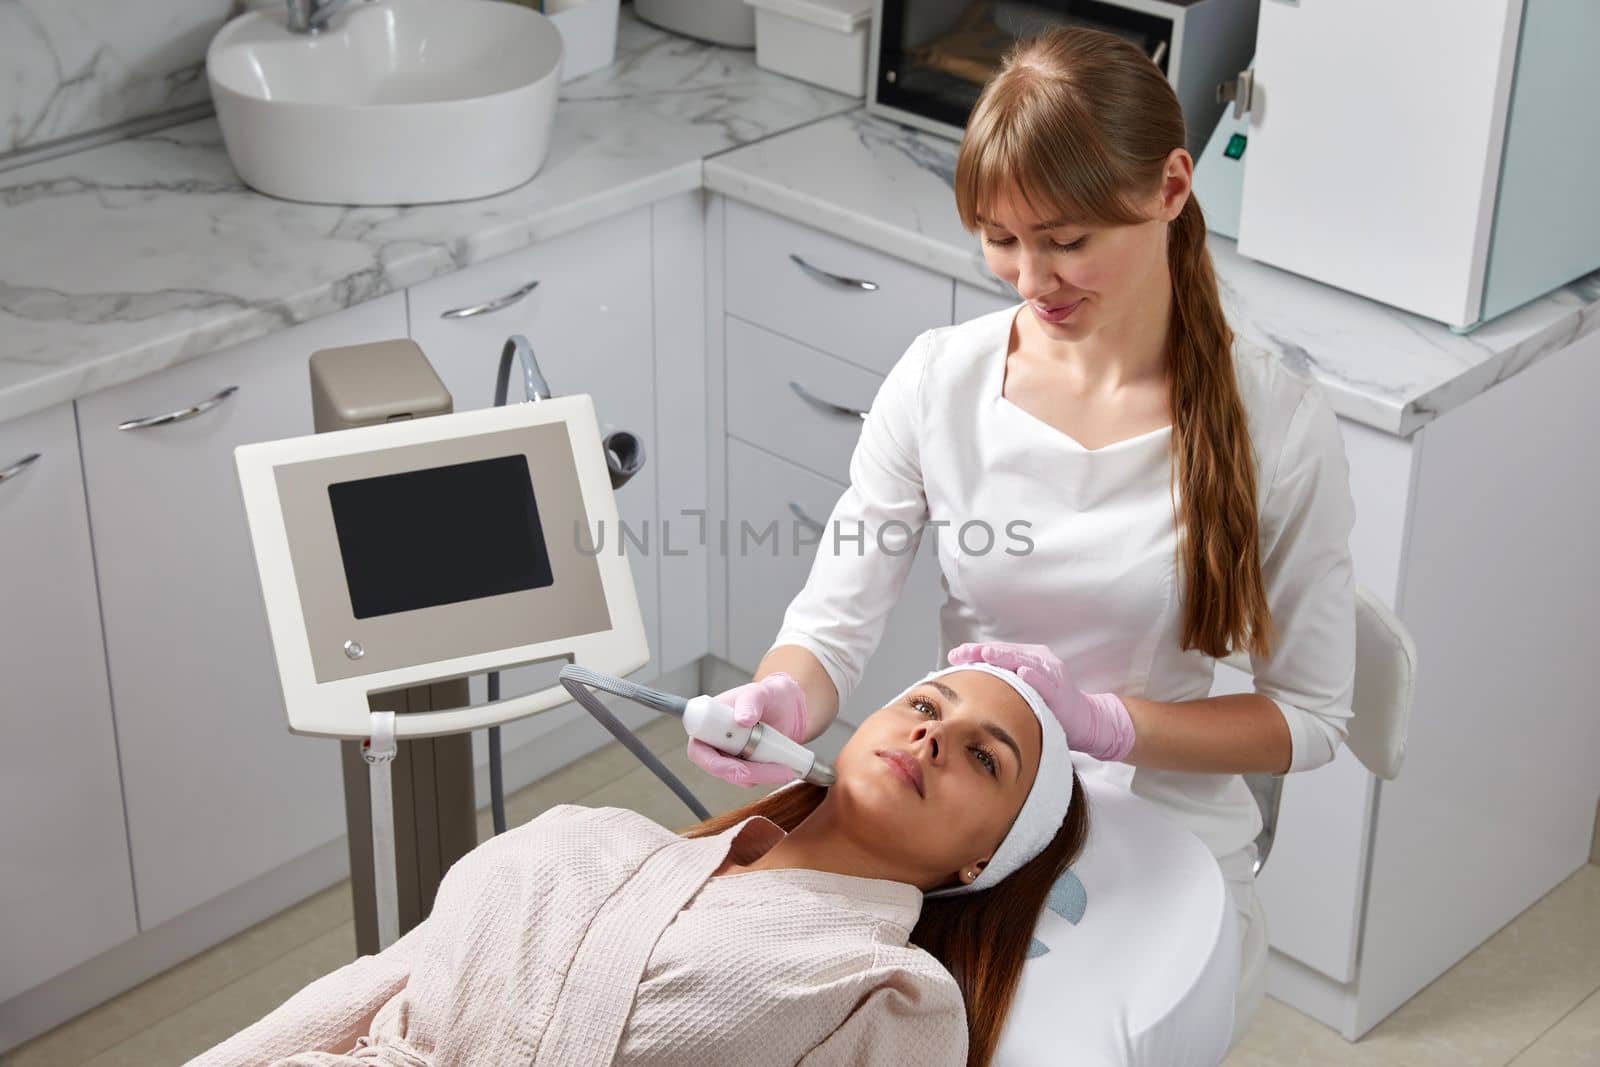 Face Skin Care. Close-up Of Woman Getting Facial Hydro Microdermabrasion Peeling Treatment At Cosmetic Beauty Spa Clinic. Hydra Vacuum Cleaner